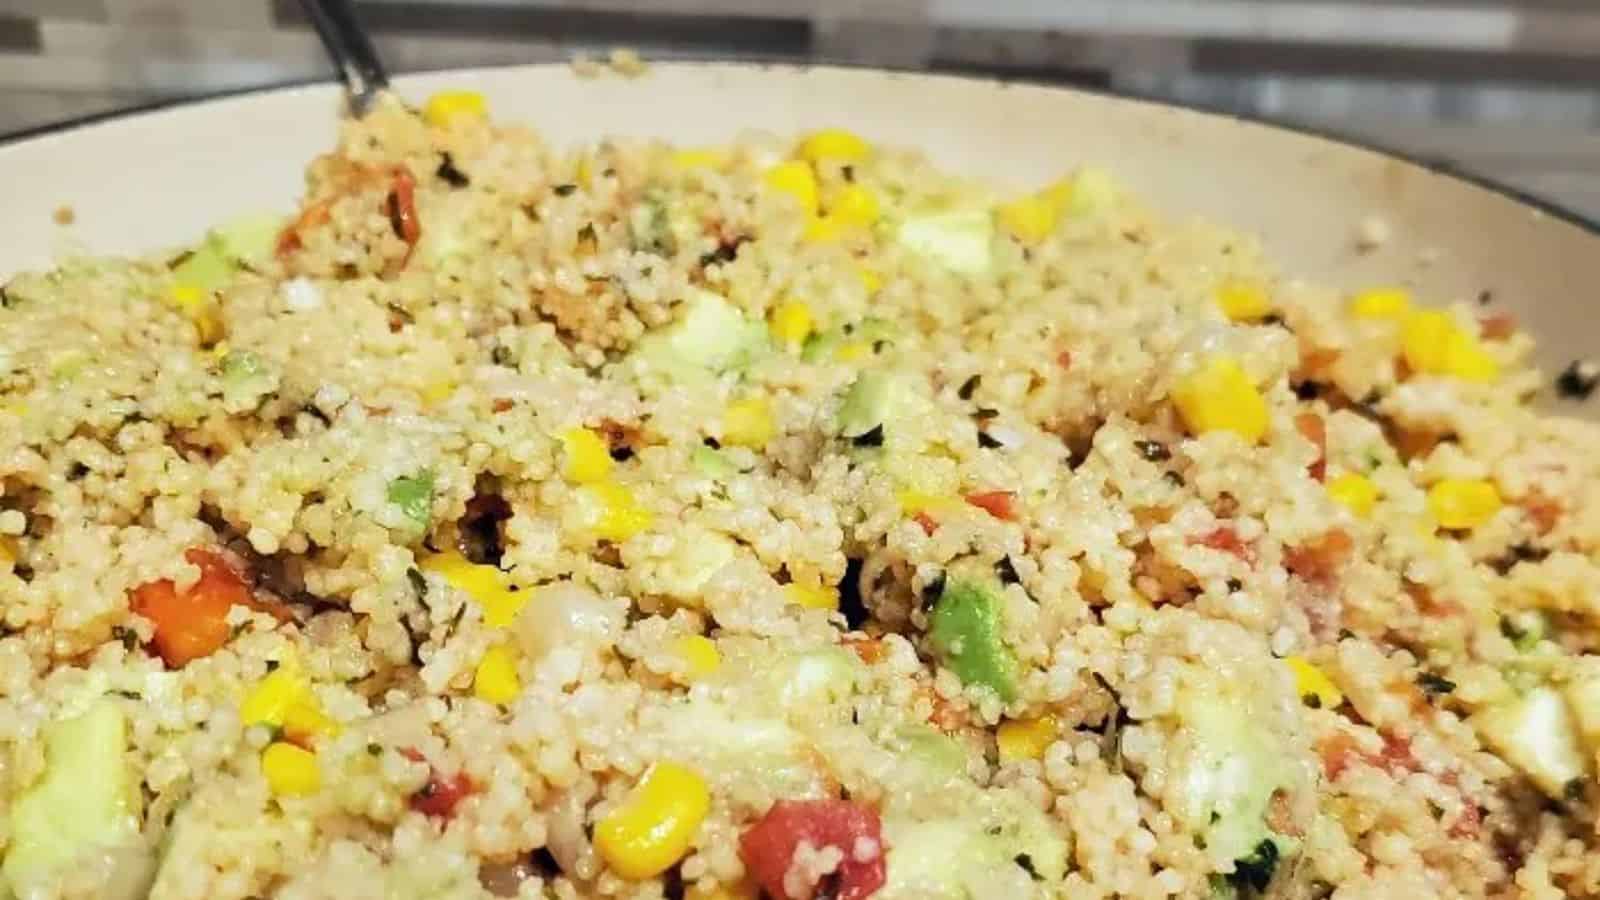 Image shows a closeup of an enameled cast iron pan filled with a vegan couscous salad.